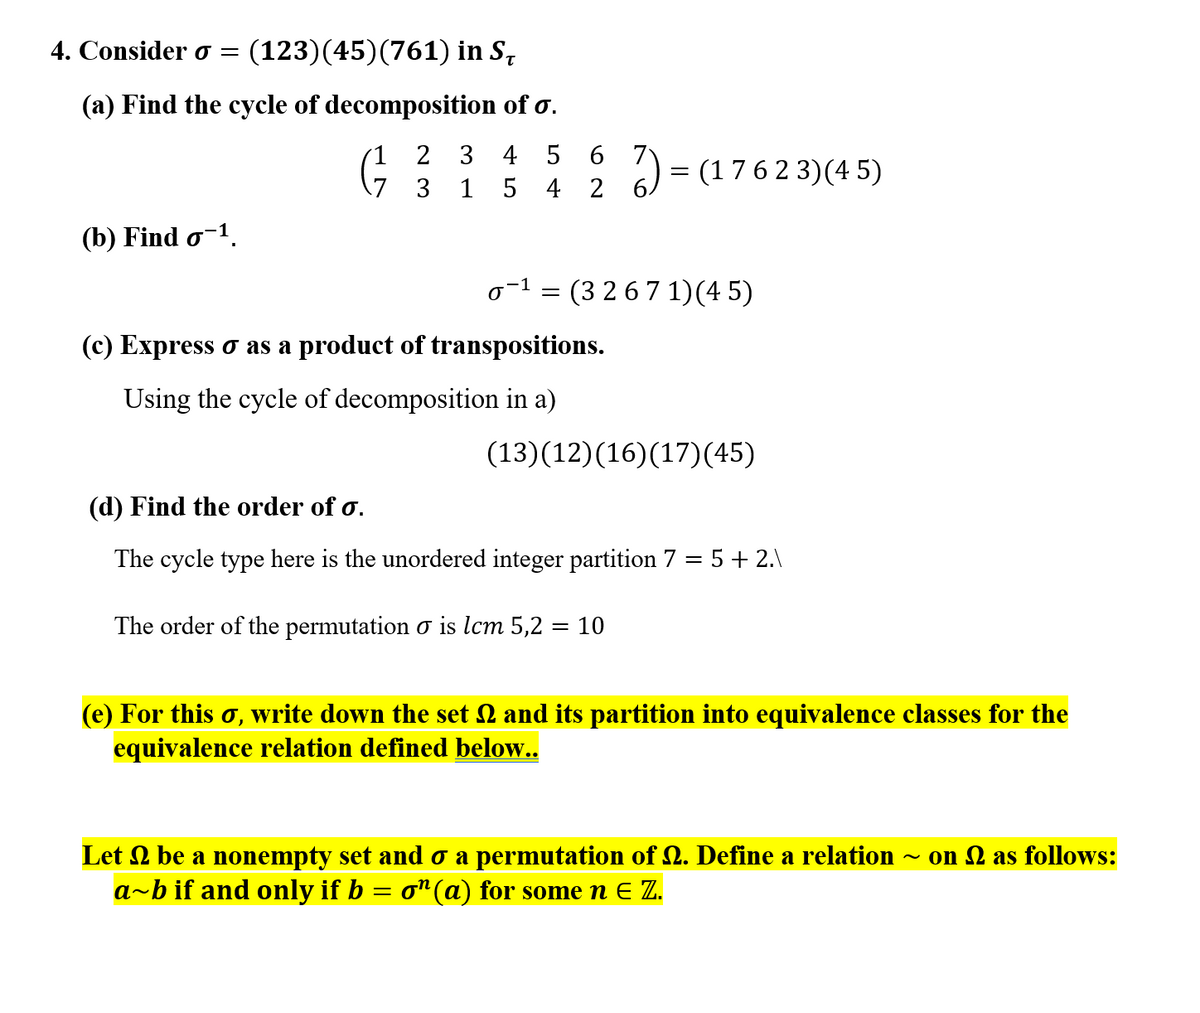 4. Consider o =
(123)(45)(761) in S,
(a) Find the cycle of decomposition of o.
2 3 4 5
6 7
= (176 2 3)(4 5)
3
1
5 4 2
(b) Find o-1.
o-1 = (3 2 6 7 1)(4 5)
(c) Express o as a product of transpositions.
Using the cycle of decomposition in a)
(13)(12)(16)(17)(45)
(d) Find the order of o.
The cycle type here is the unordered integer partition 7 = 5 + 2.\
The order of the permutation o is lcm 5,2 = 10
(e) For this o, write down the set 2 and its partition into equivalence classes for the
equivalence relation defined below..
Let 2 be a nonempty set and o a permutation of 2. Define a relation
a-b if and only if b = o"(a) for some n E Z.
on 2 as follows:
